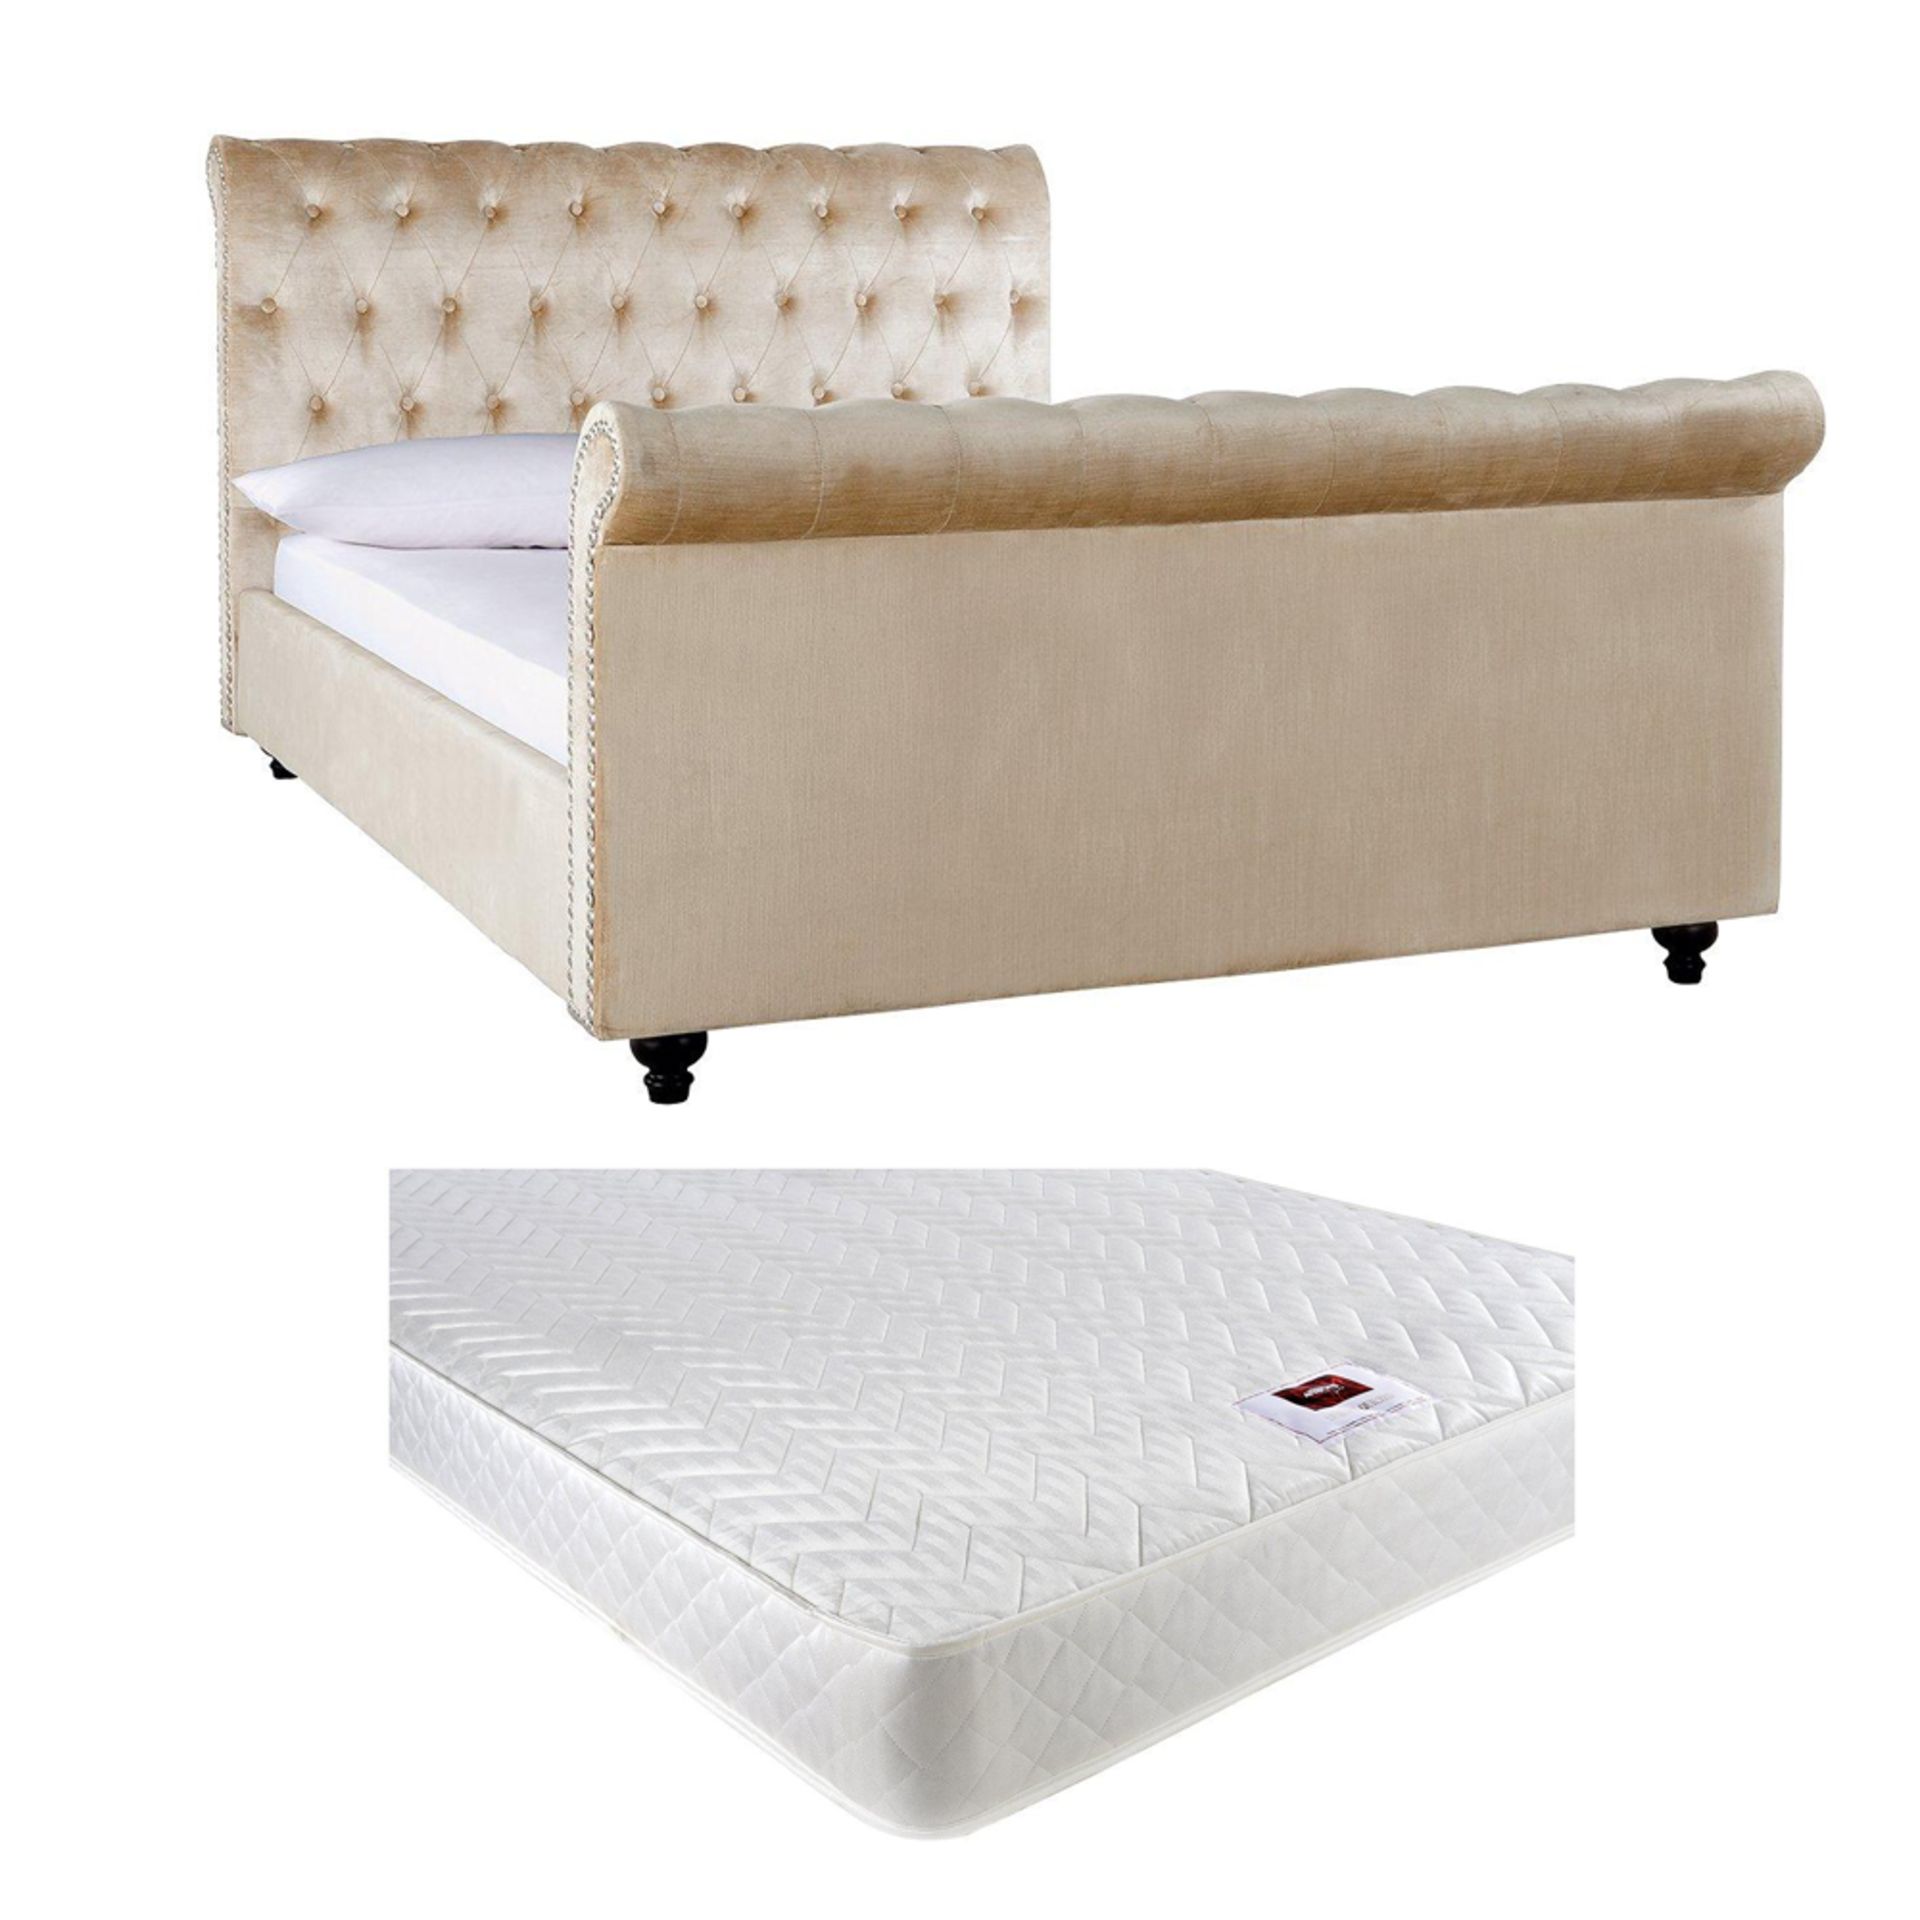 Boxed Item Woburn Double Bed [Natural] And Mattress Set Rrp:¬£848